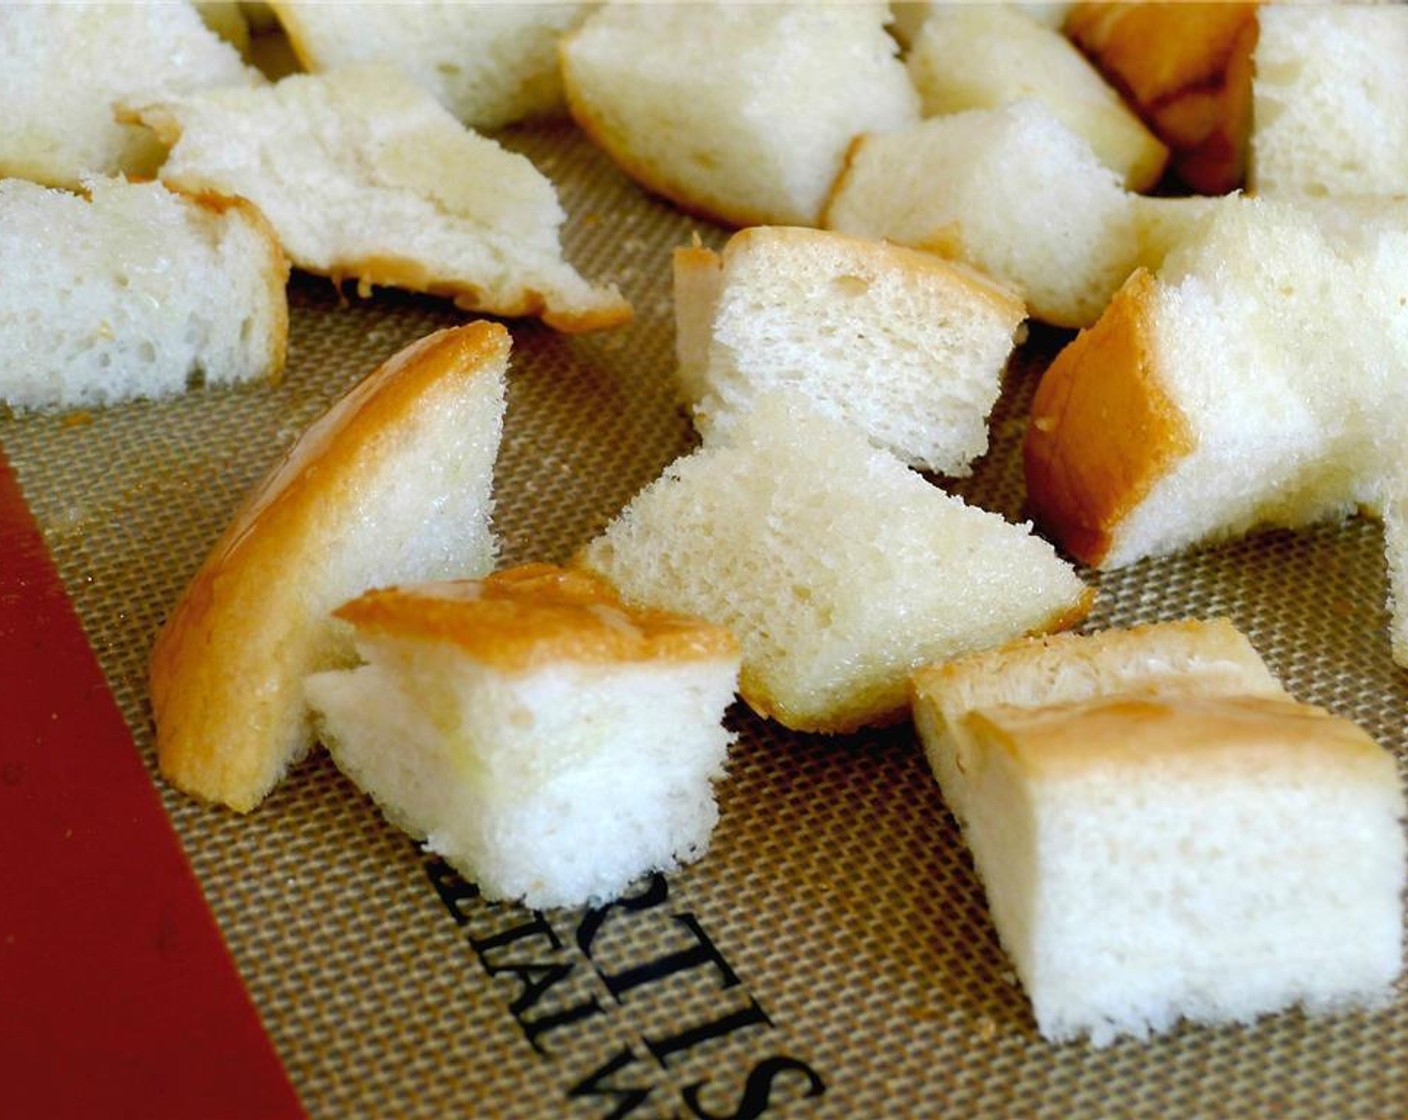 step 6 Toss the cubes of bread with the Olive Oil (2 Tbsp) and spread onto a baking sheet. Place in the oven for 8 minutes.